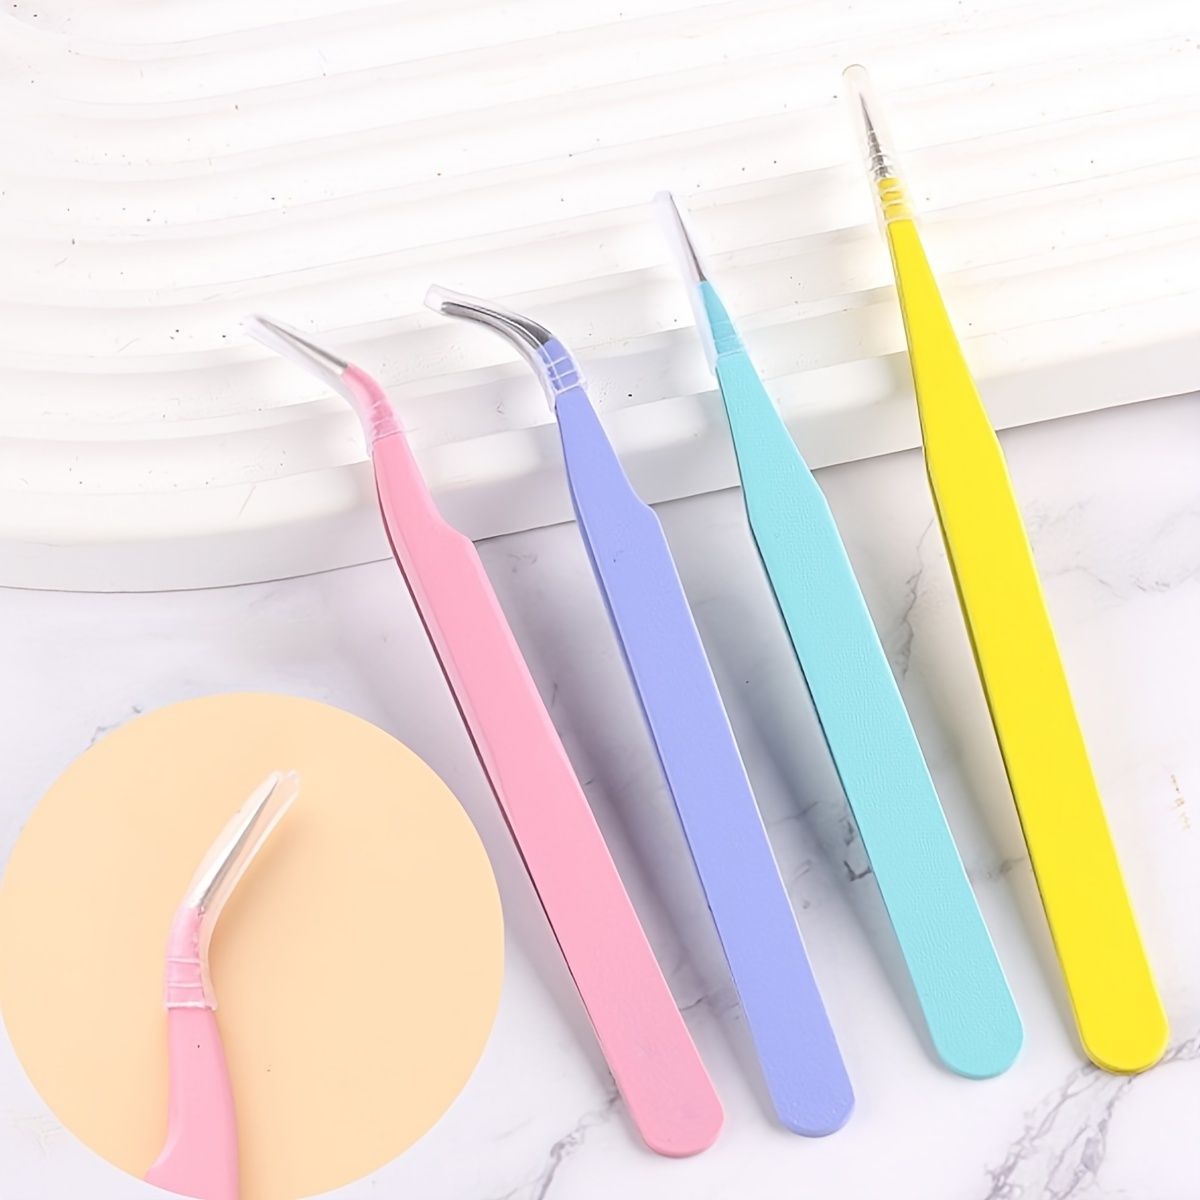  2 Pcs Stainless Steel Eyebrow Tip Tweezers Picker Eyelash  Extensions Nippers for Women : Beauty & Personal Care